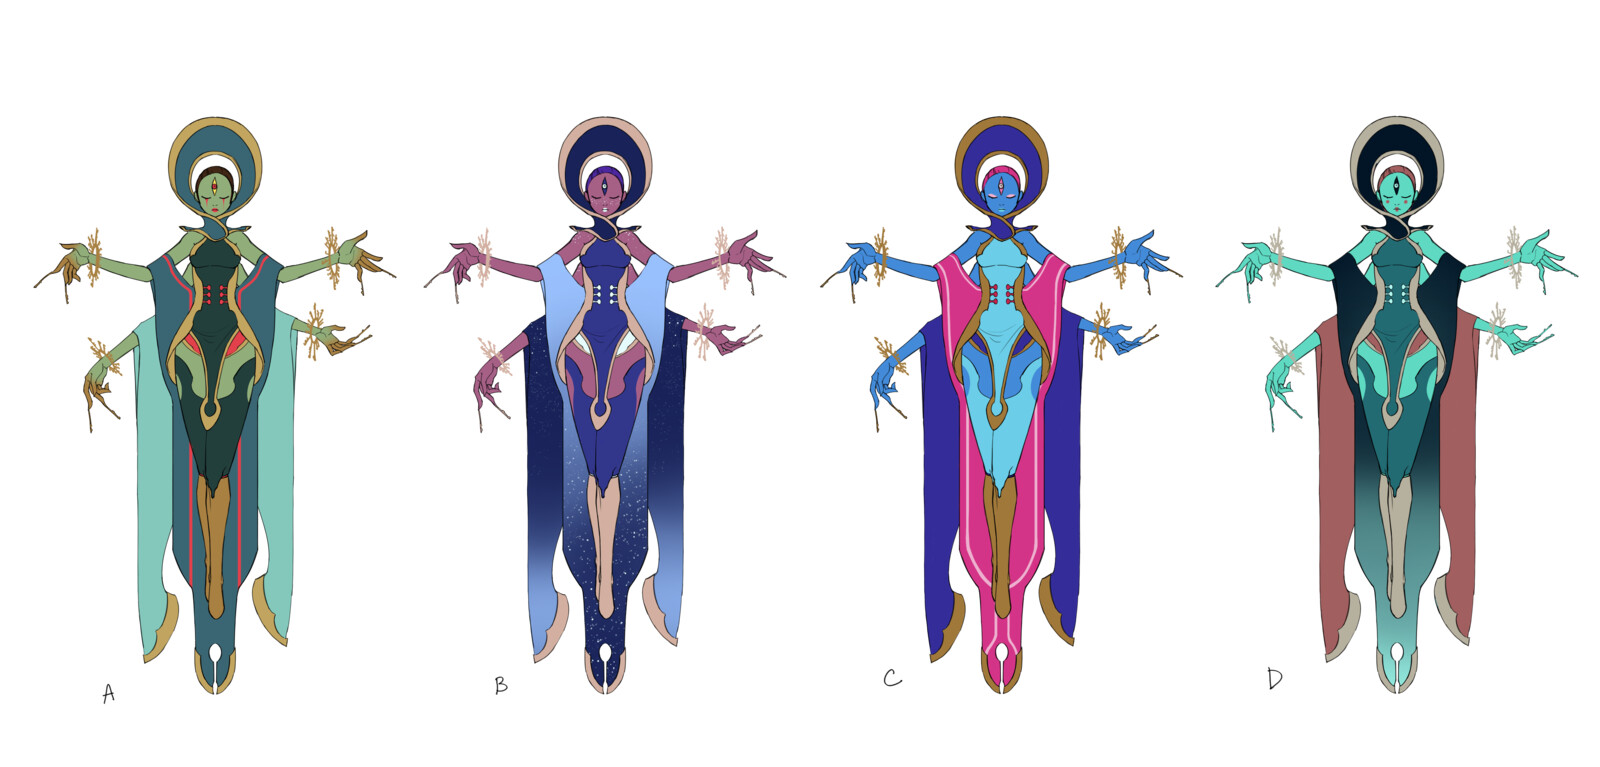 I choose a sketch that best communicates my initial idea for the character, and I explore different colors. 